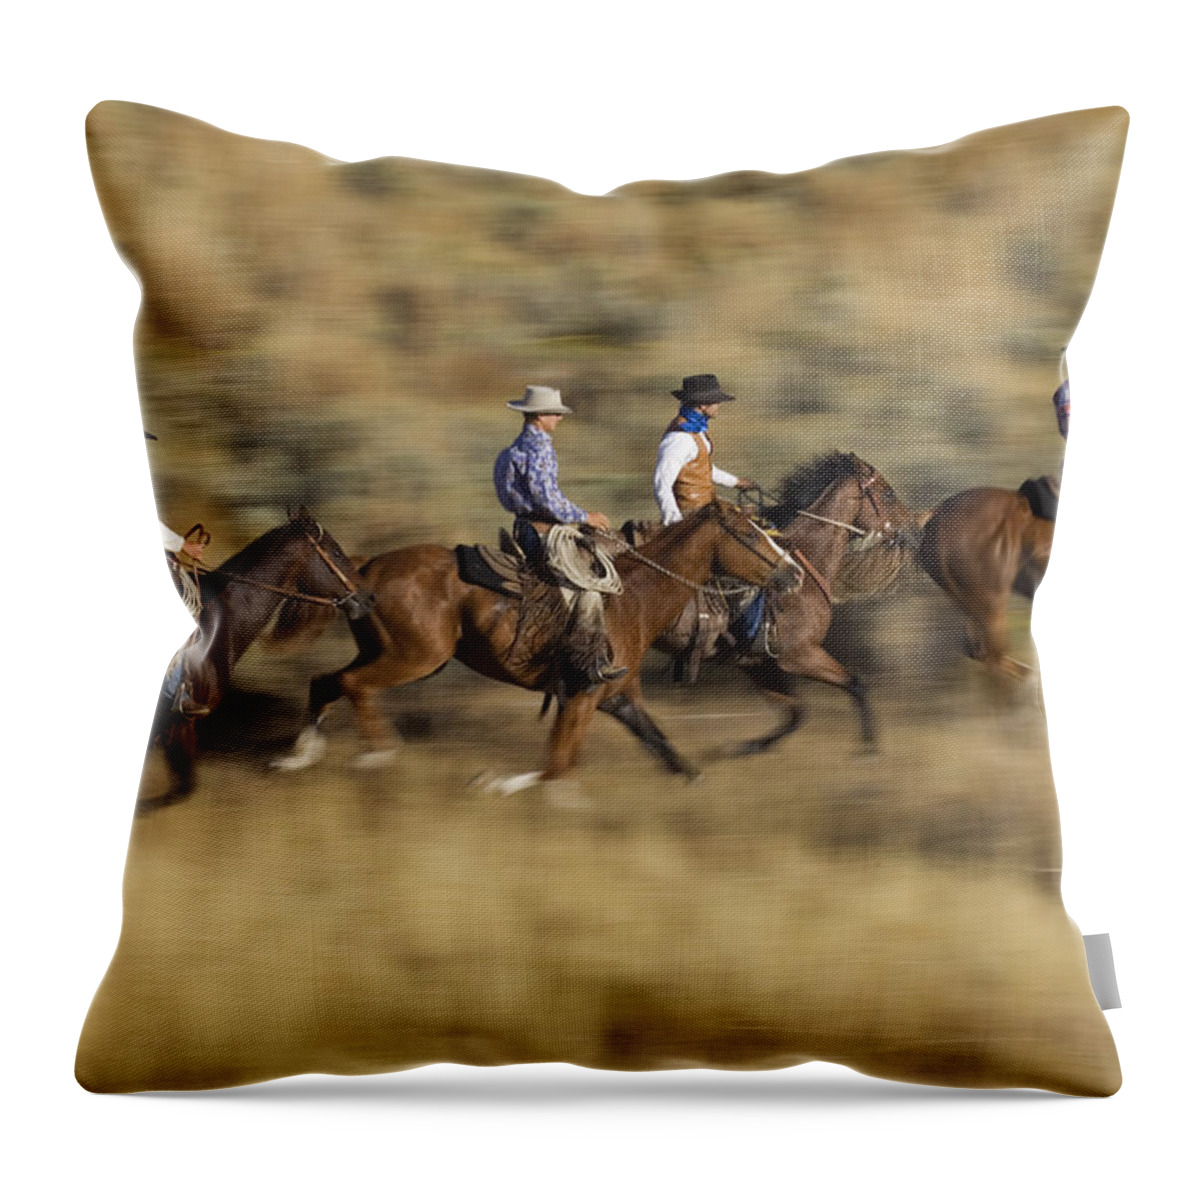 Feb0514 Throw Pillow featuring the photograph Cowboys And Cowgirl Riding Oregon by Konrad Wothe